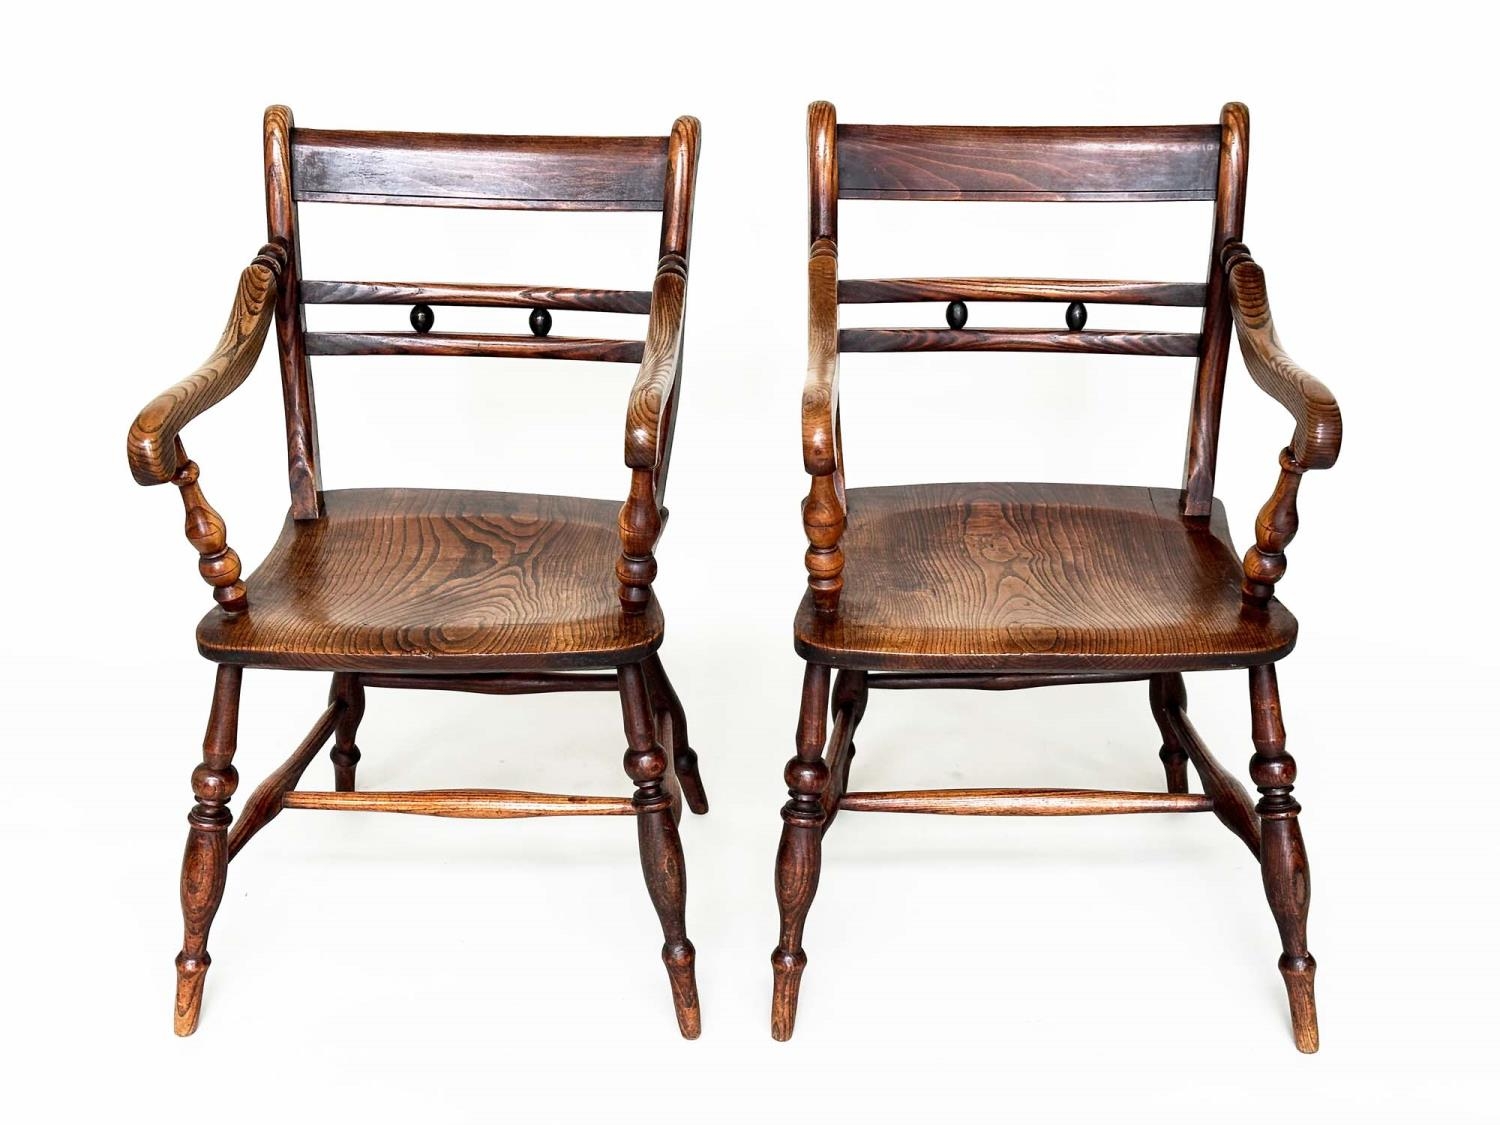 OXFORD ARMCHAIRS, a pair, 19th century English, High Wycombe, ash, elm and alder with shaped seats - Image 3 of 11